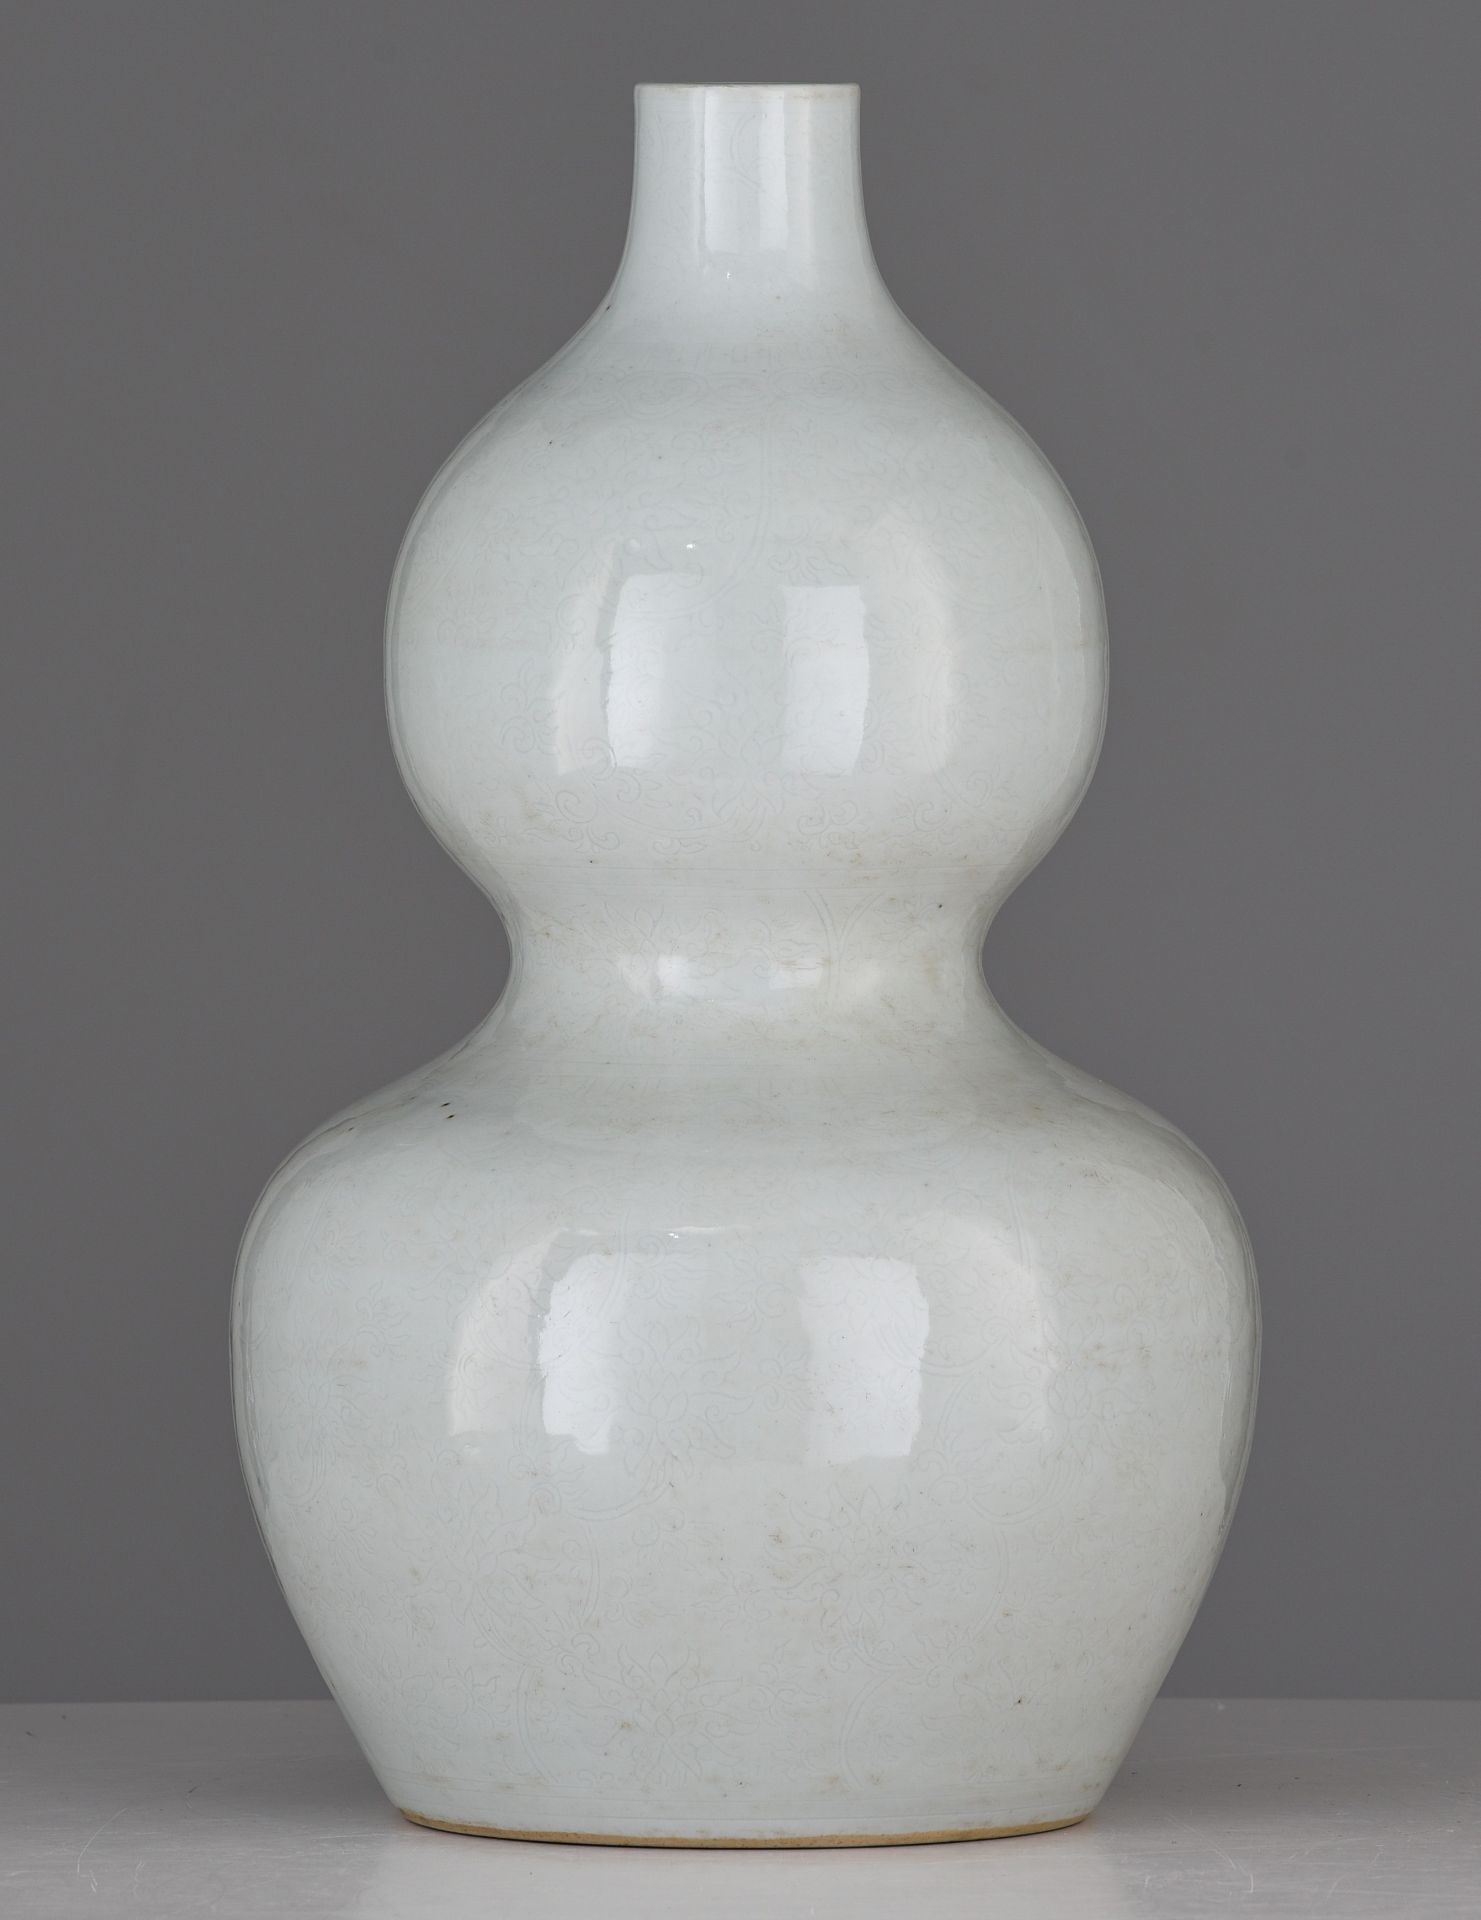 A Chinese anhua tianbai-glazed double-gourd vase, incised with 'Da Ming Wanli Nian Zhi' at the botto - Image 3 of 7